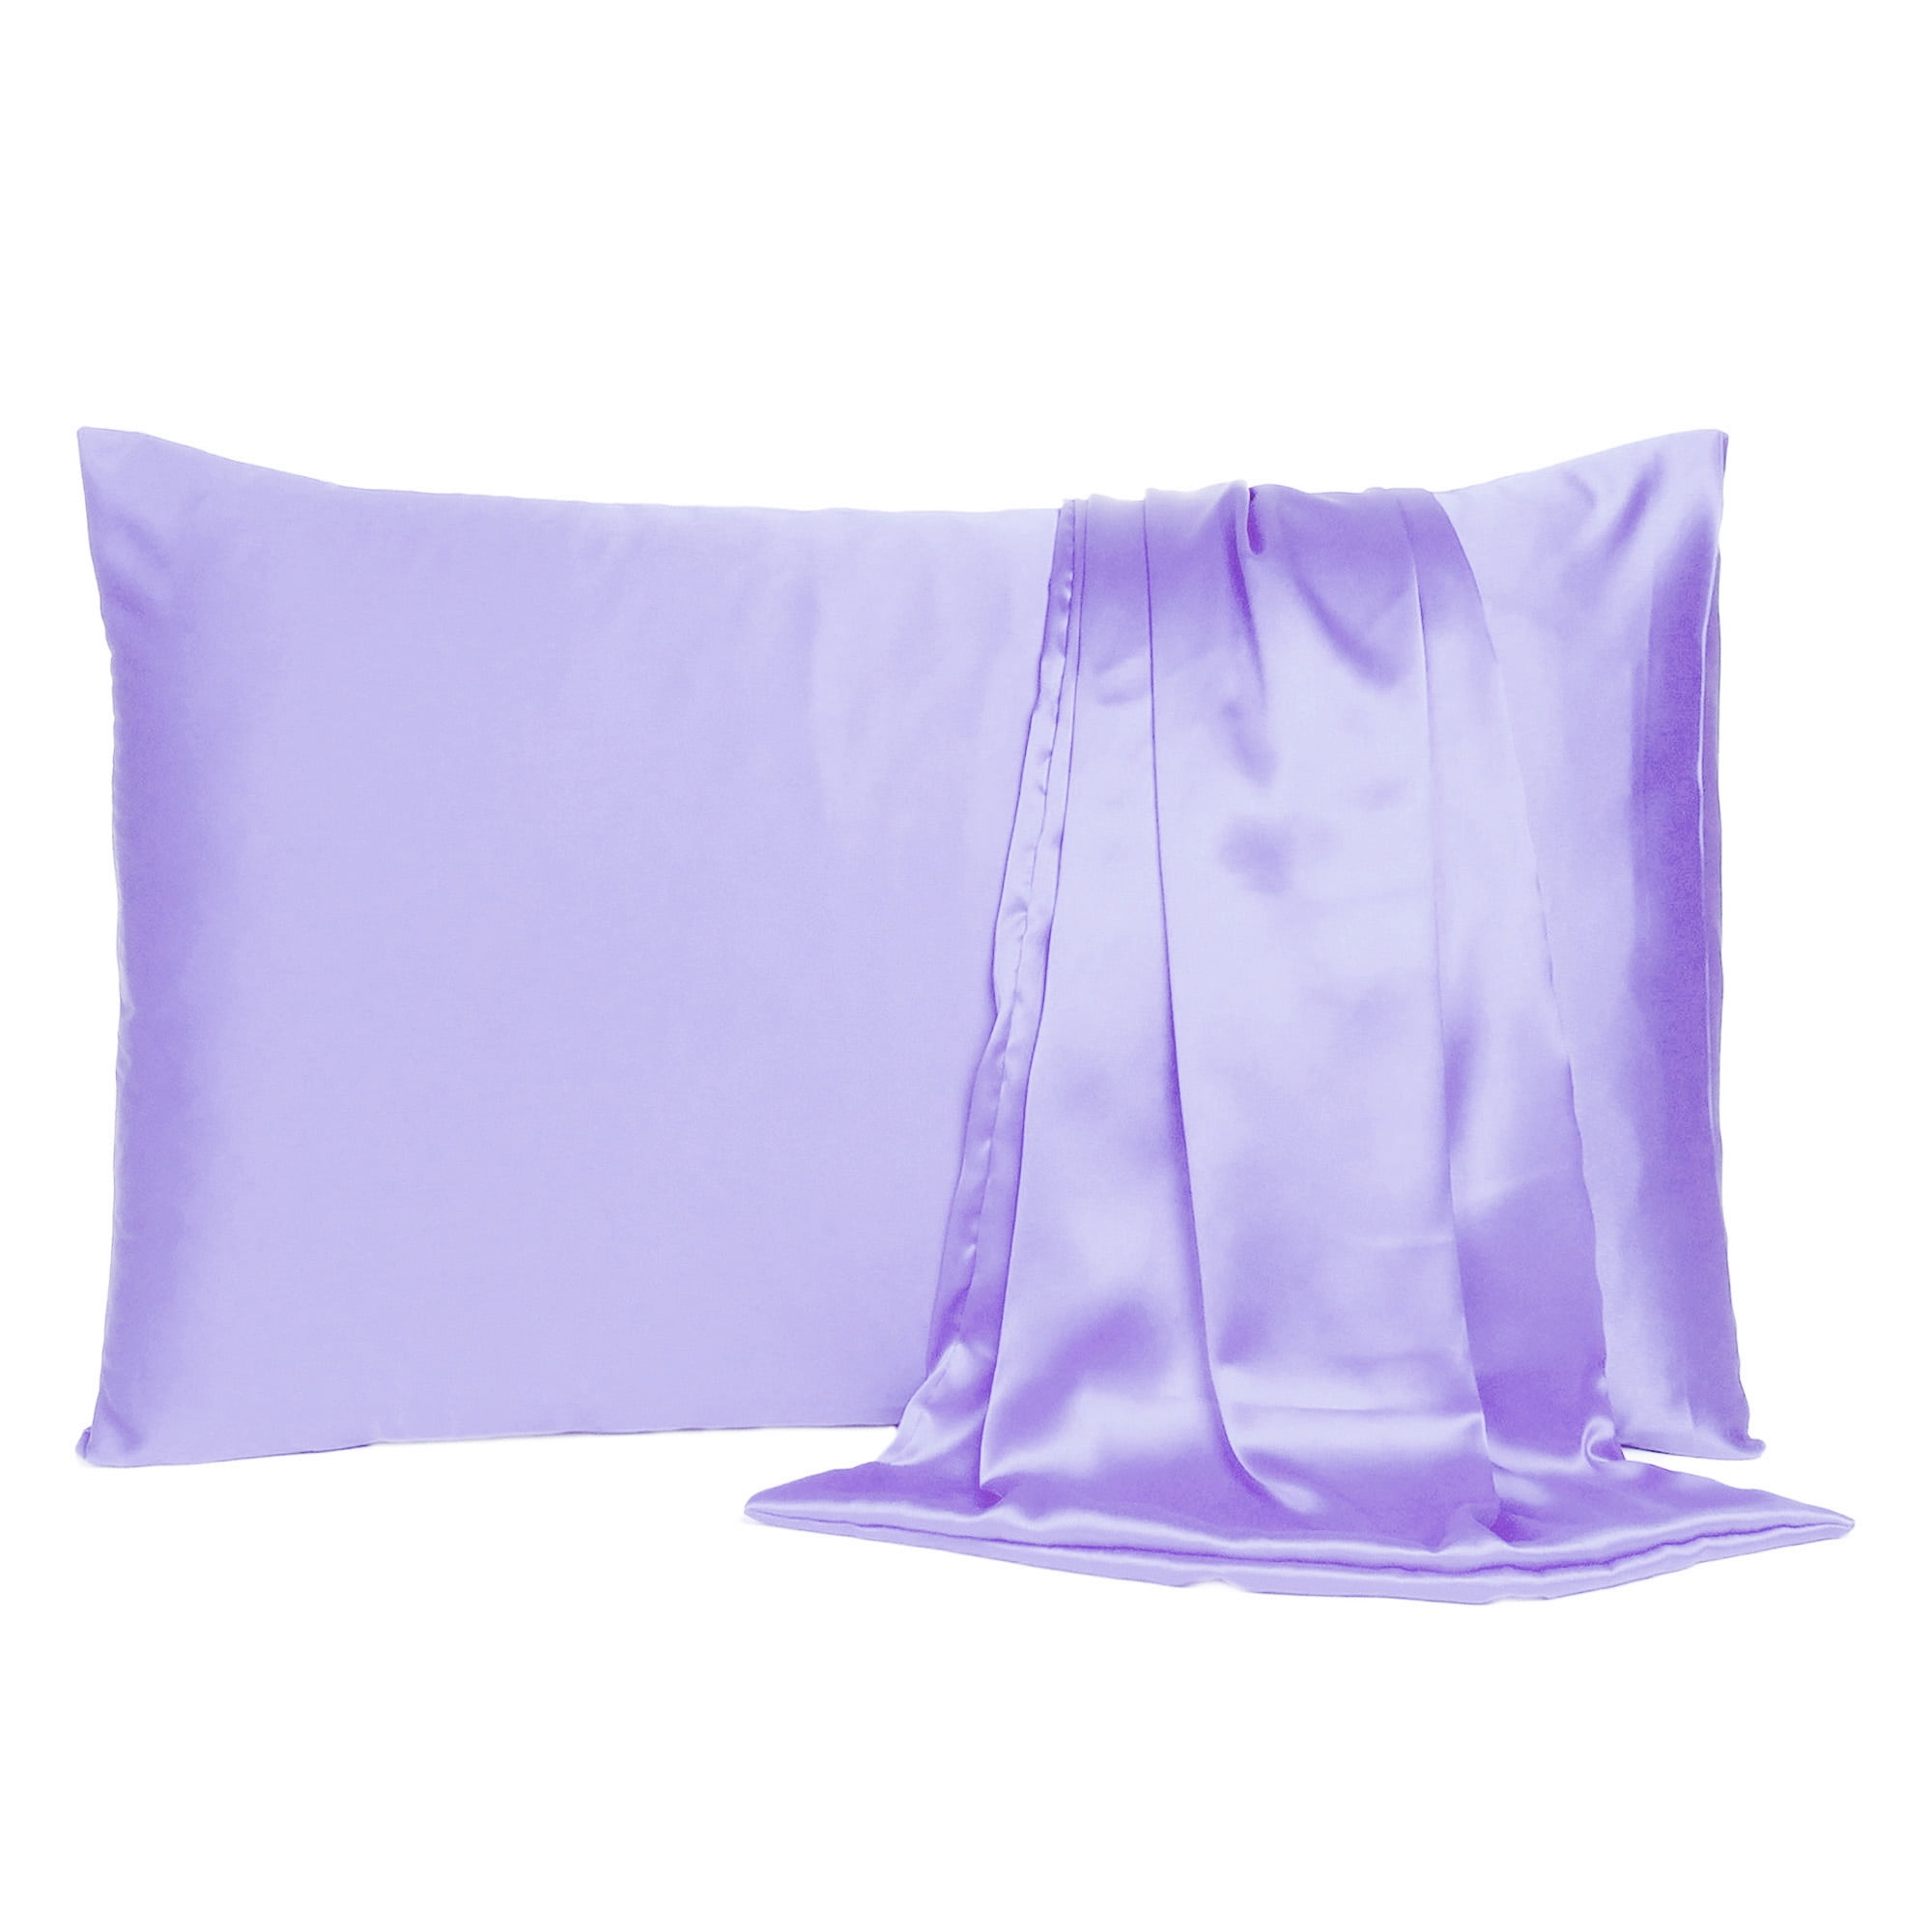 2 Pieces Silk Satin Pillowcases Standard Queen King Size Hypoallergenic and Soft 